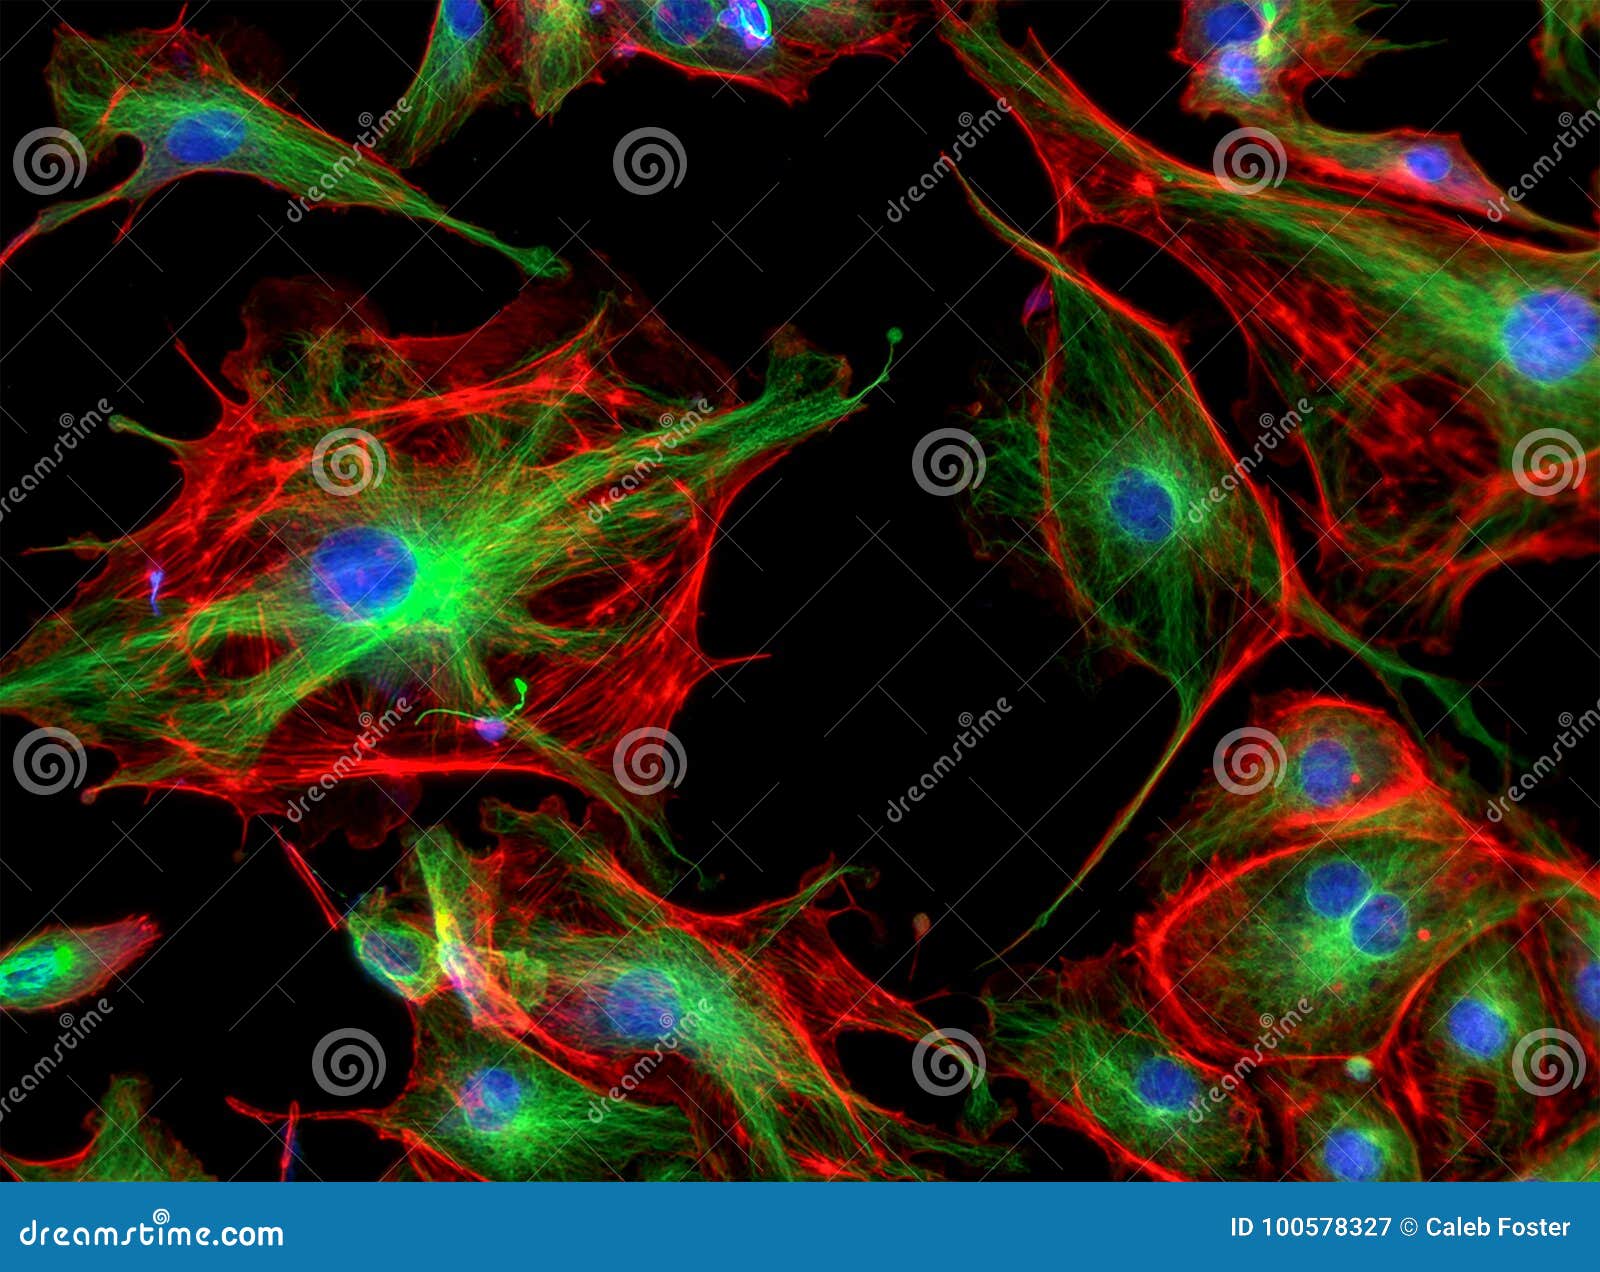 fluorescence microscope image of cells undergoing mitosis